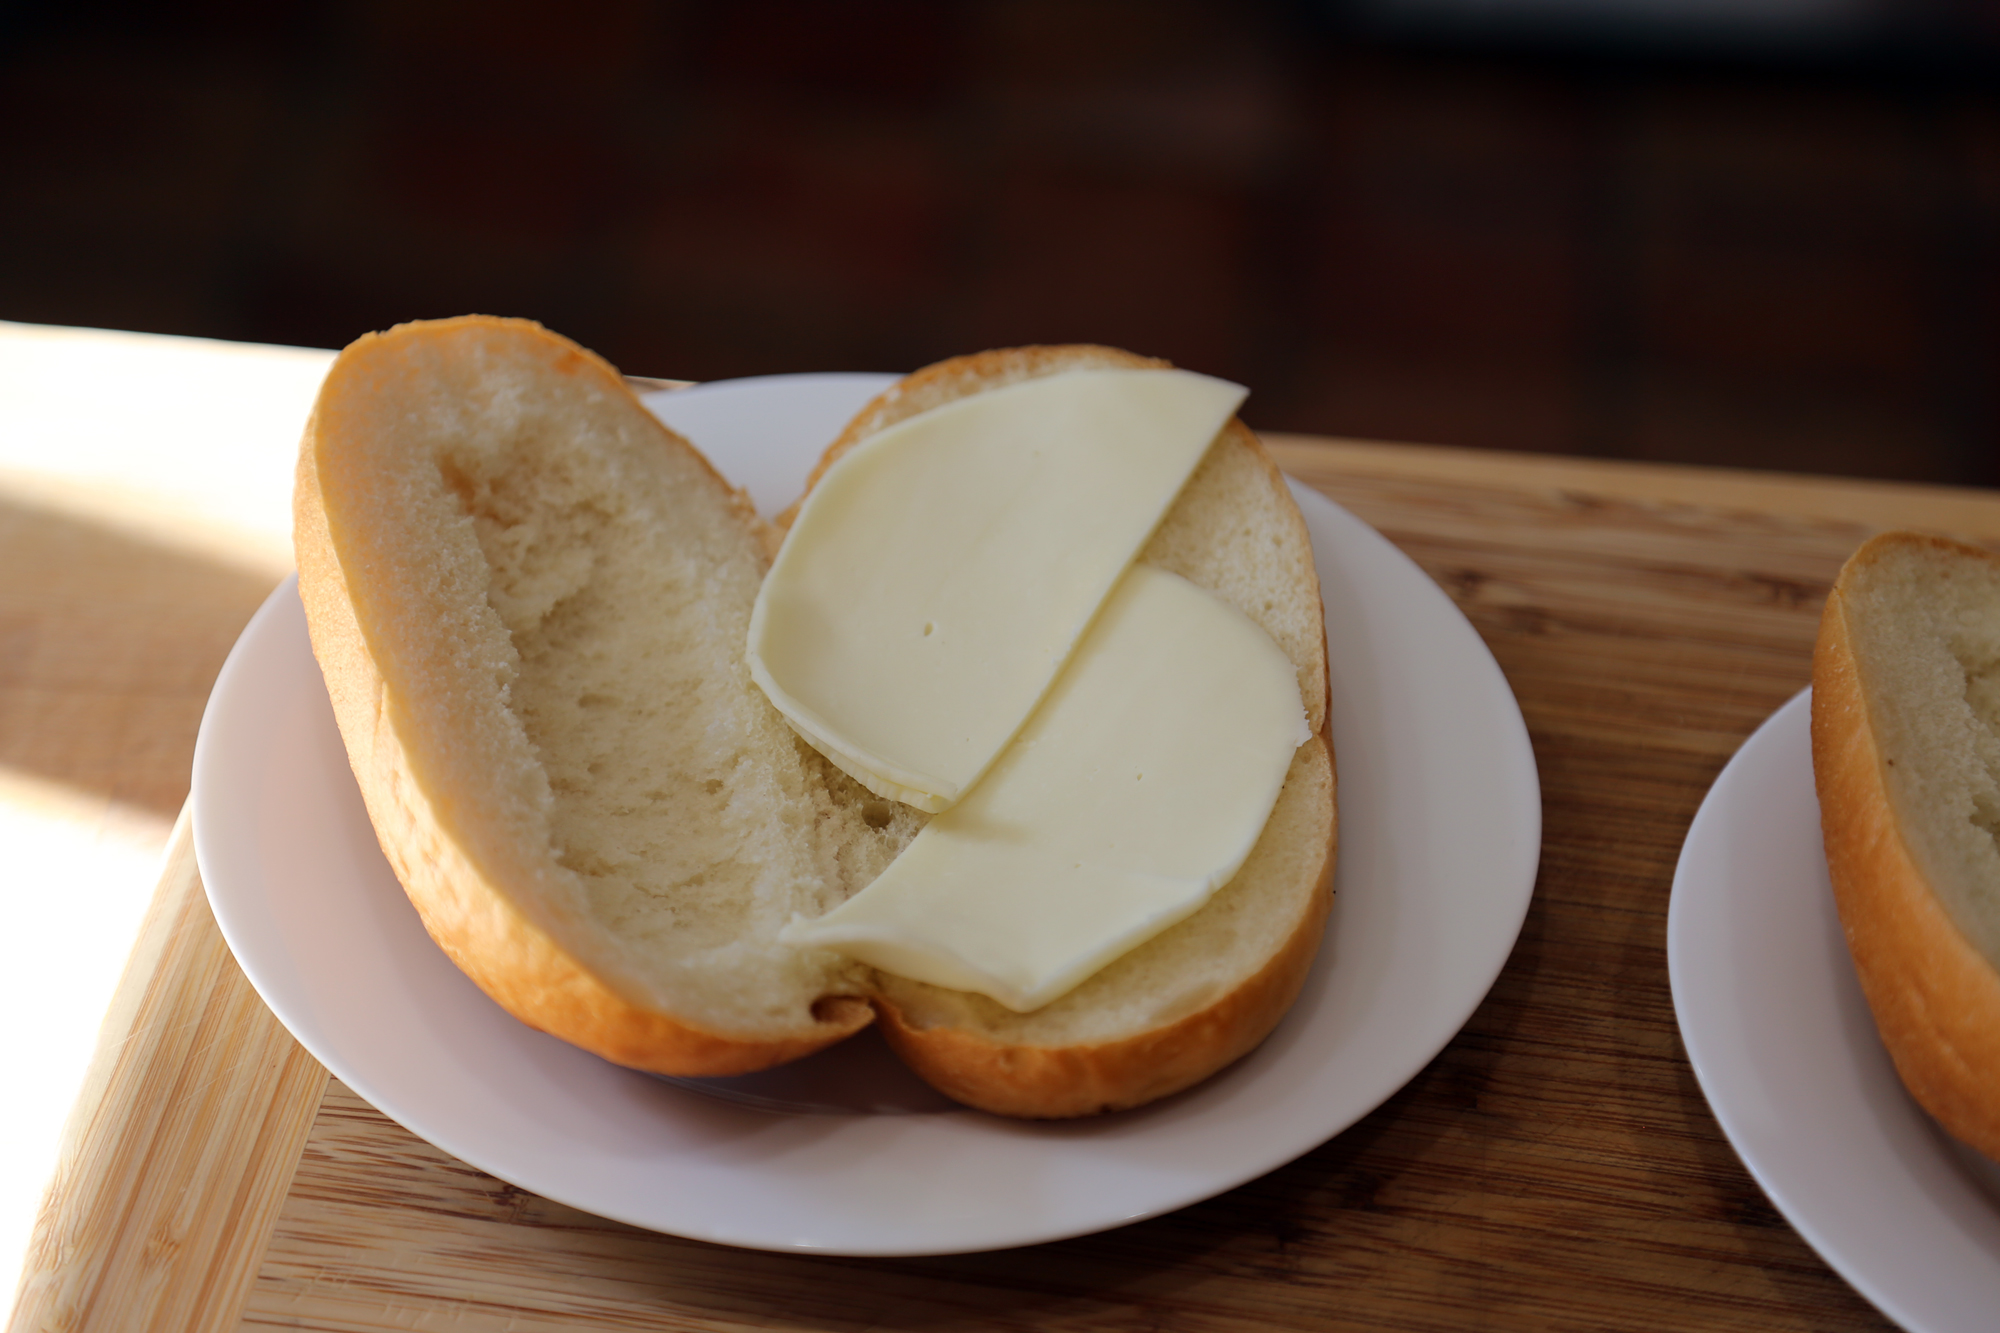 Line the bottom of each roll with 1 oz Provolone, cutting to fit.